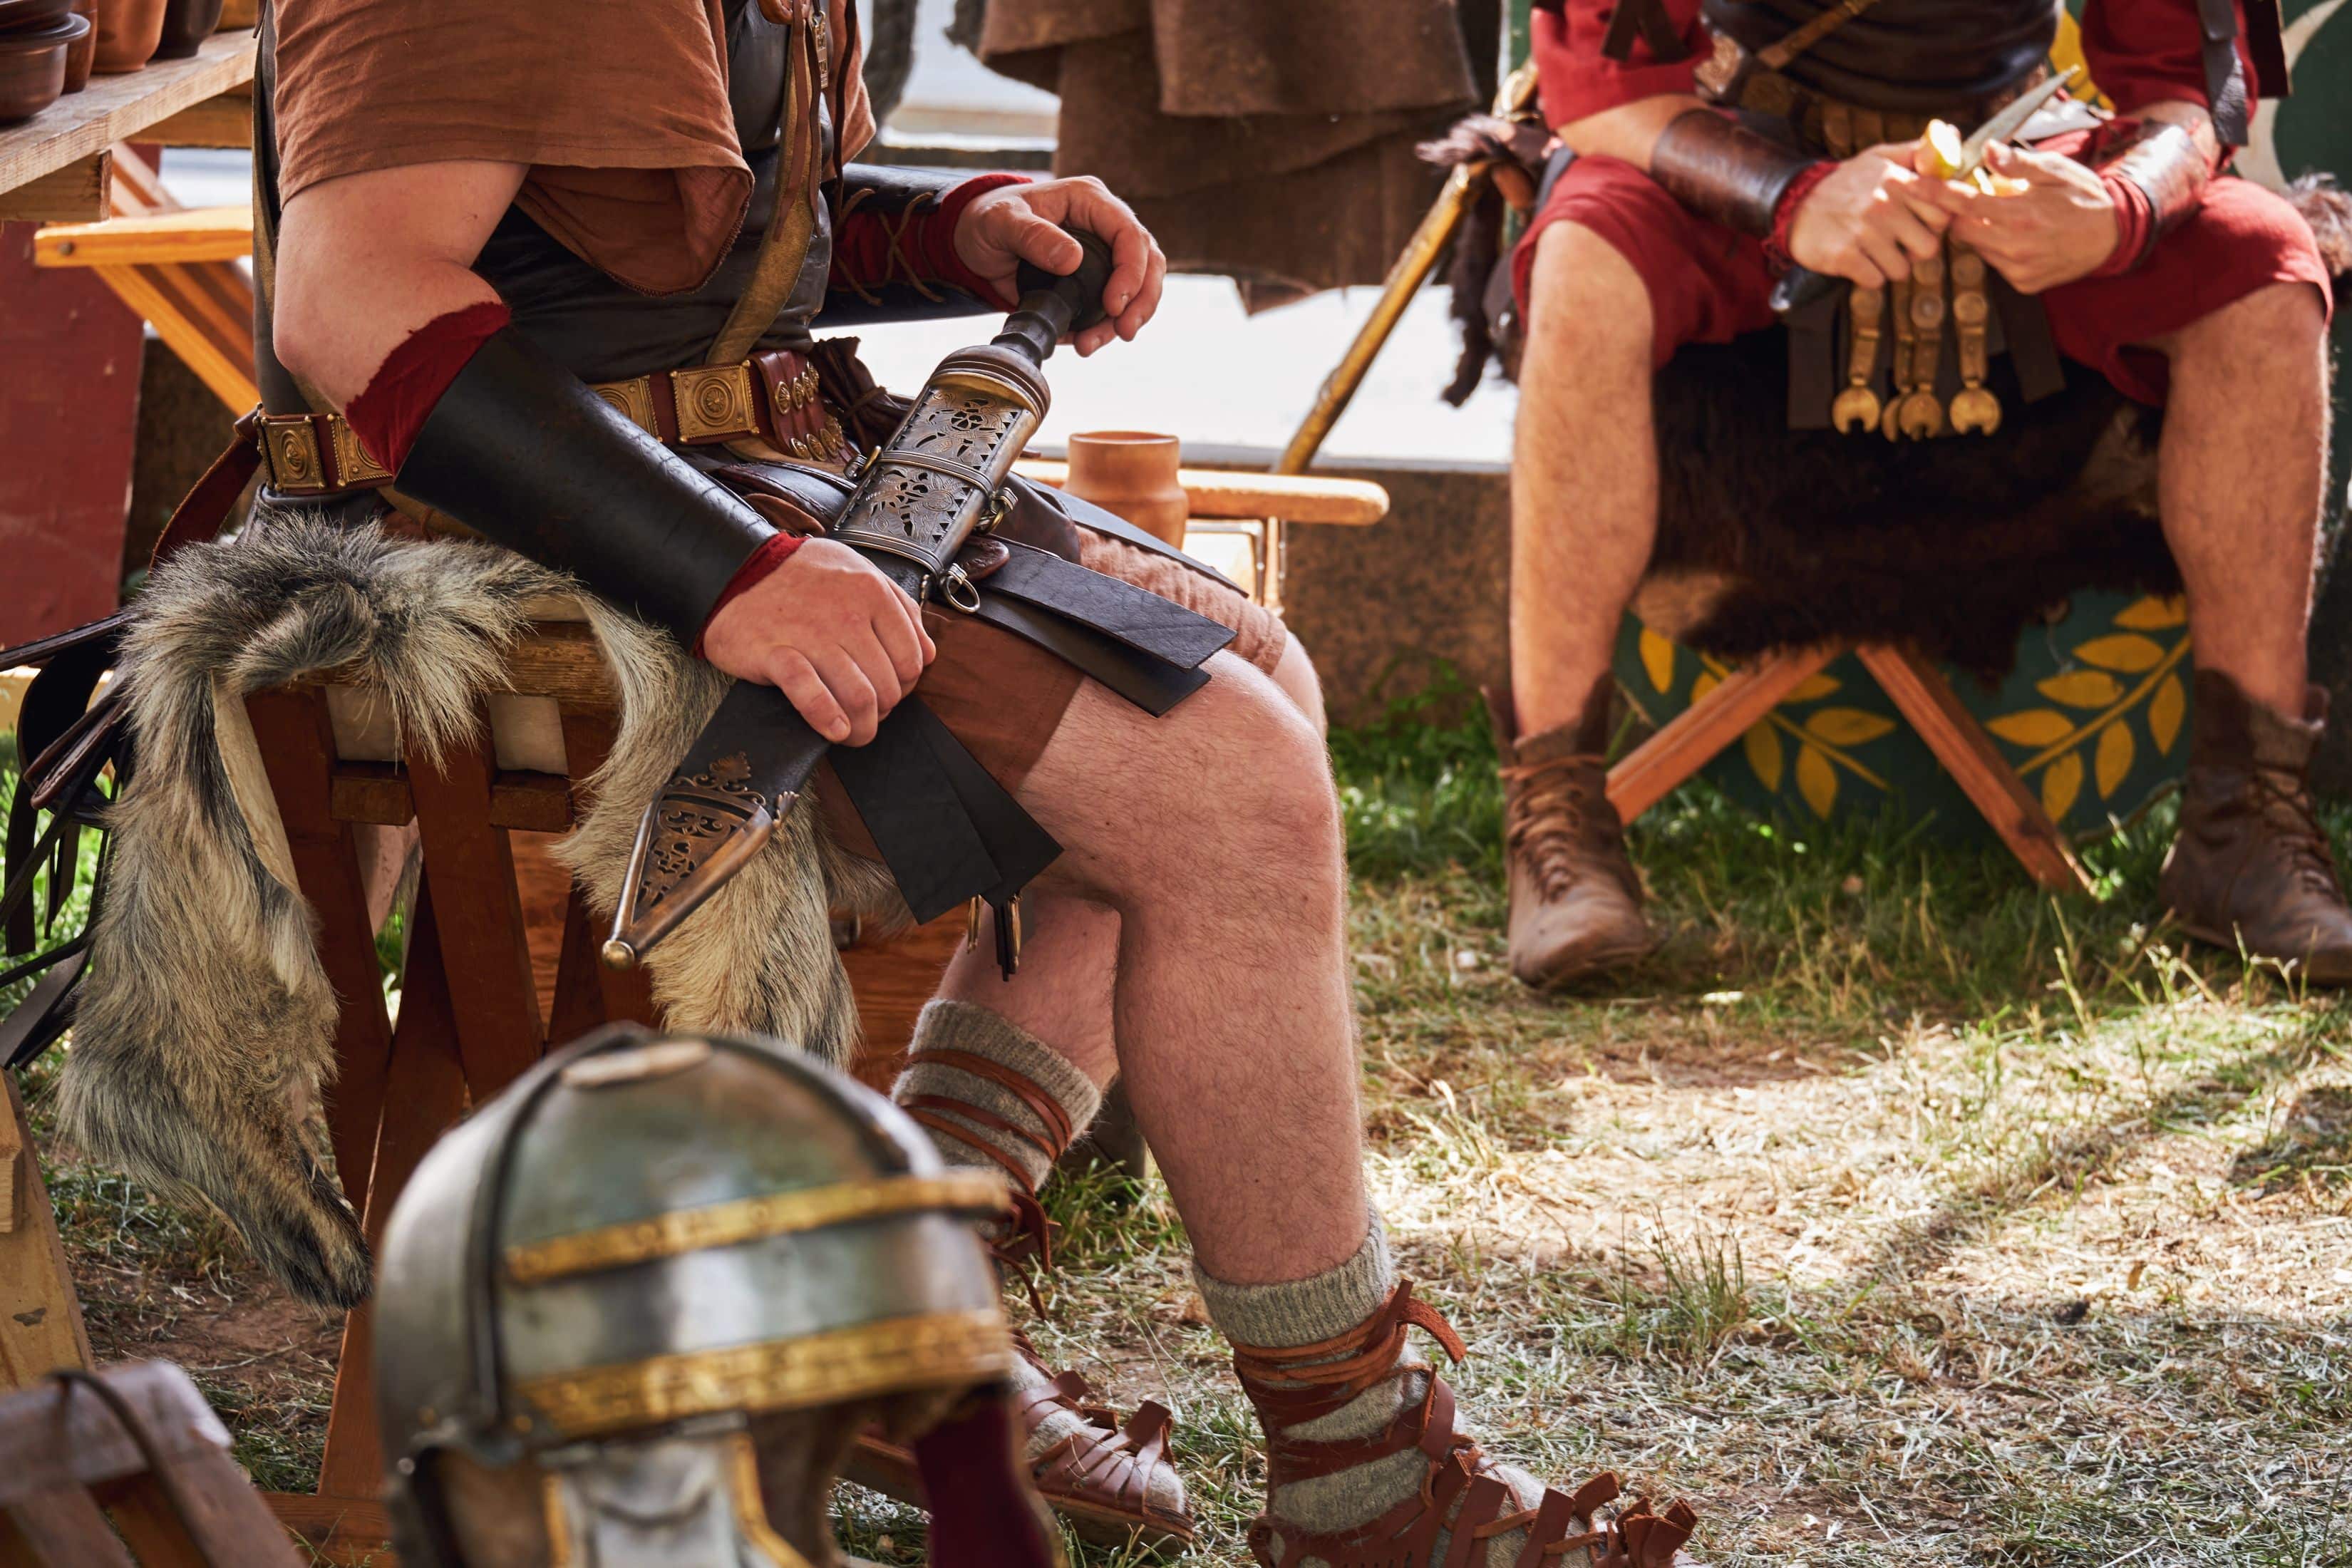 The camp of ancient Roman warriors in vintage clothes at a halt. Reconstruction of military events during the war of the Roman Empire